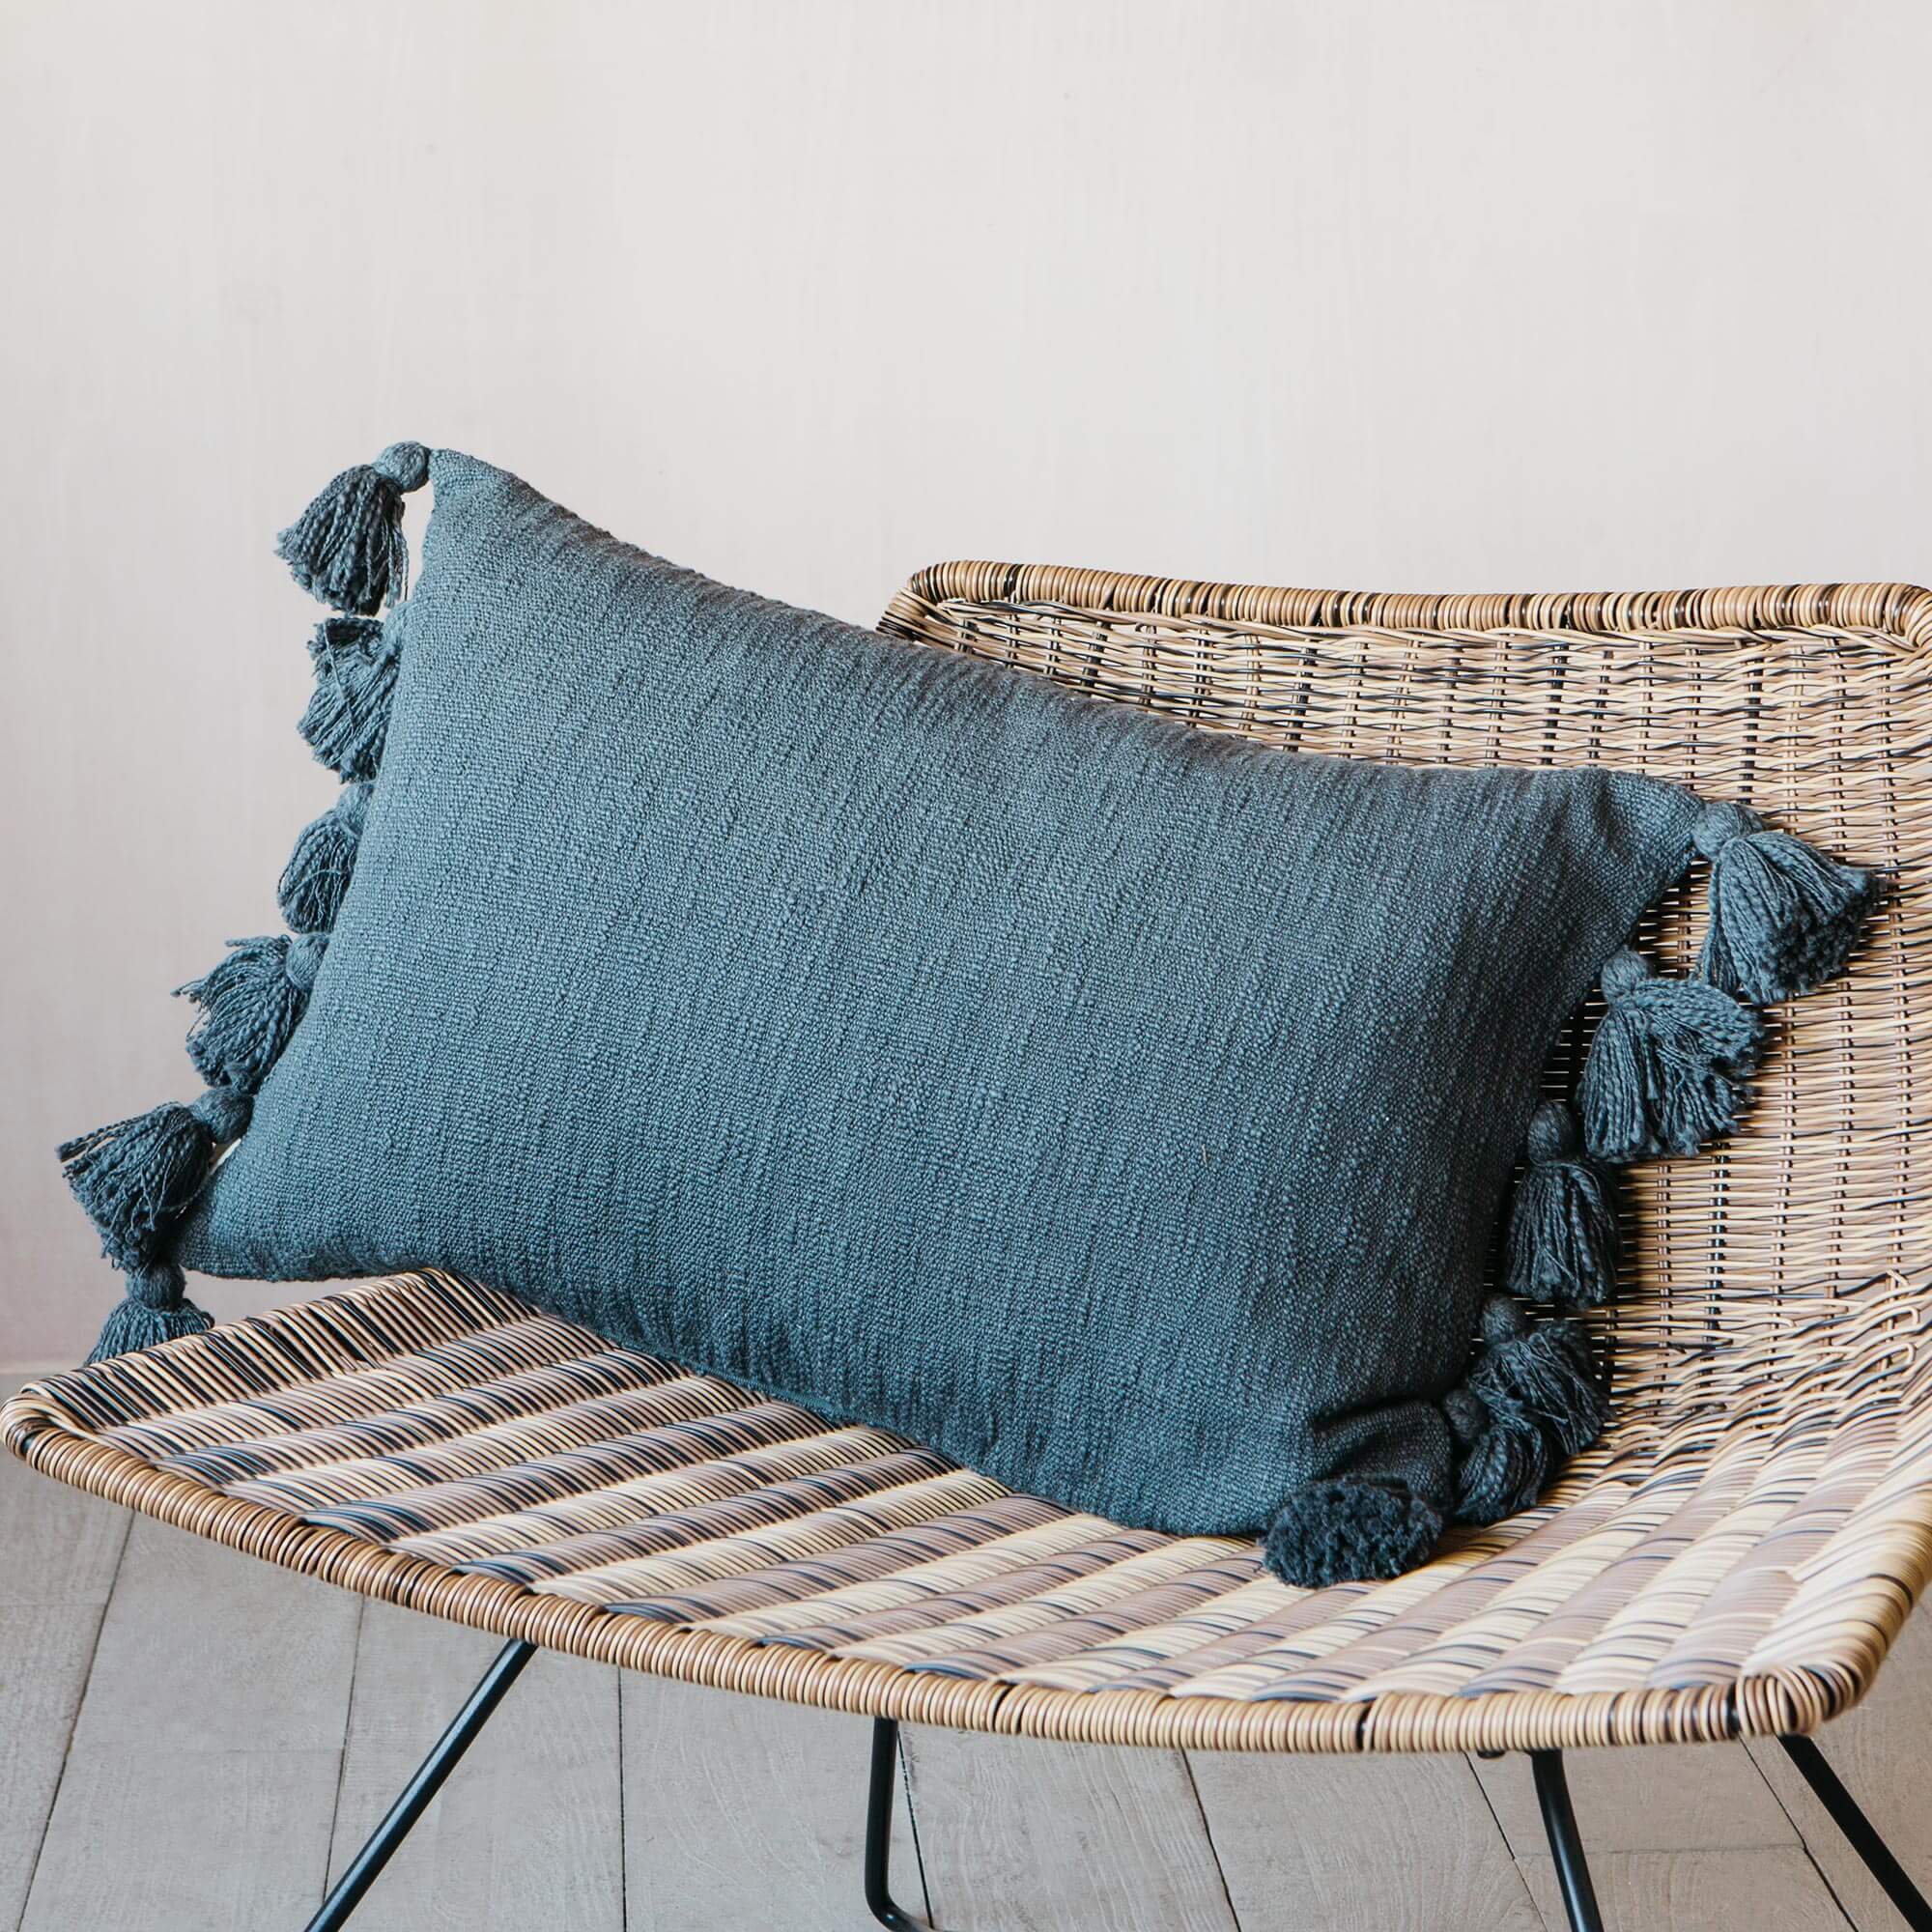 Read more about Graham and green charcoal tassel cushion